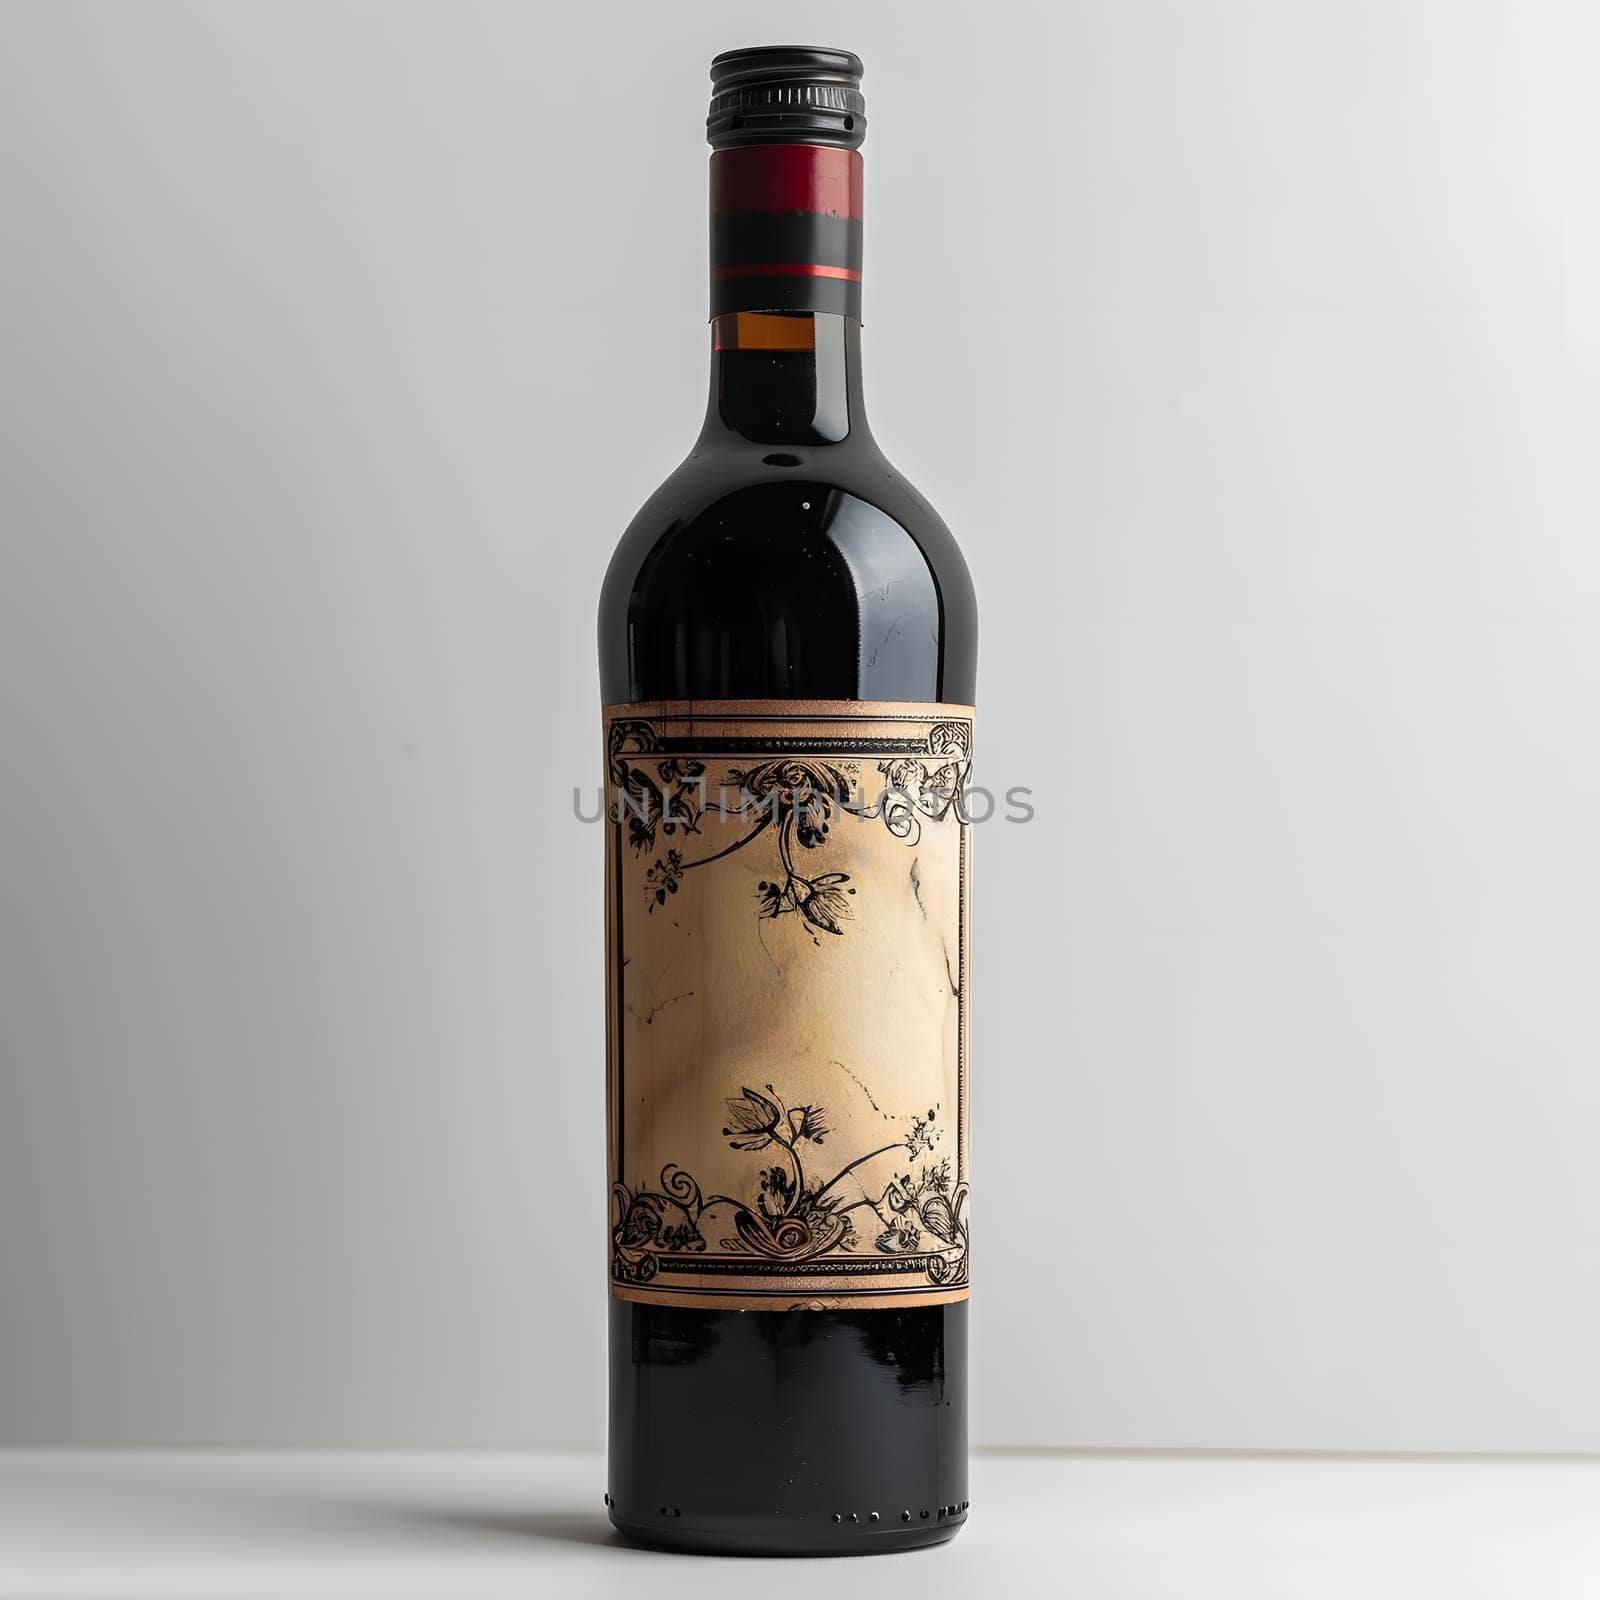 a bottle of red wine with a floral label by Nadtochiy